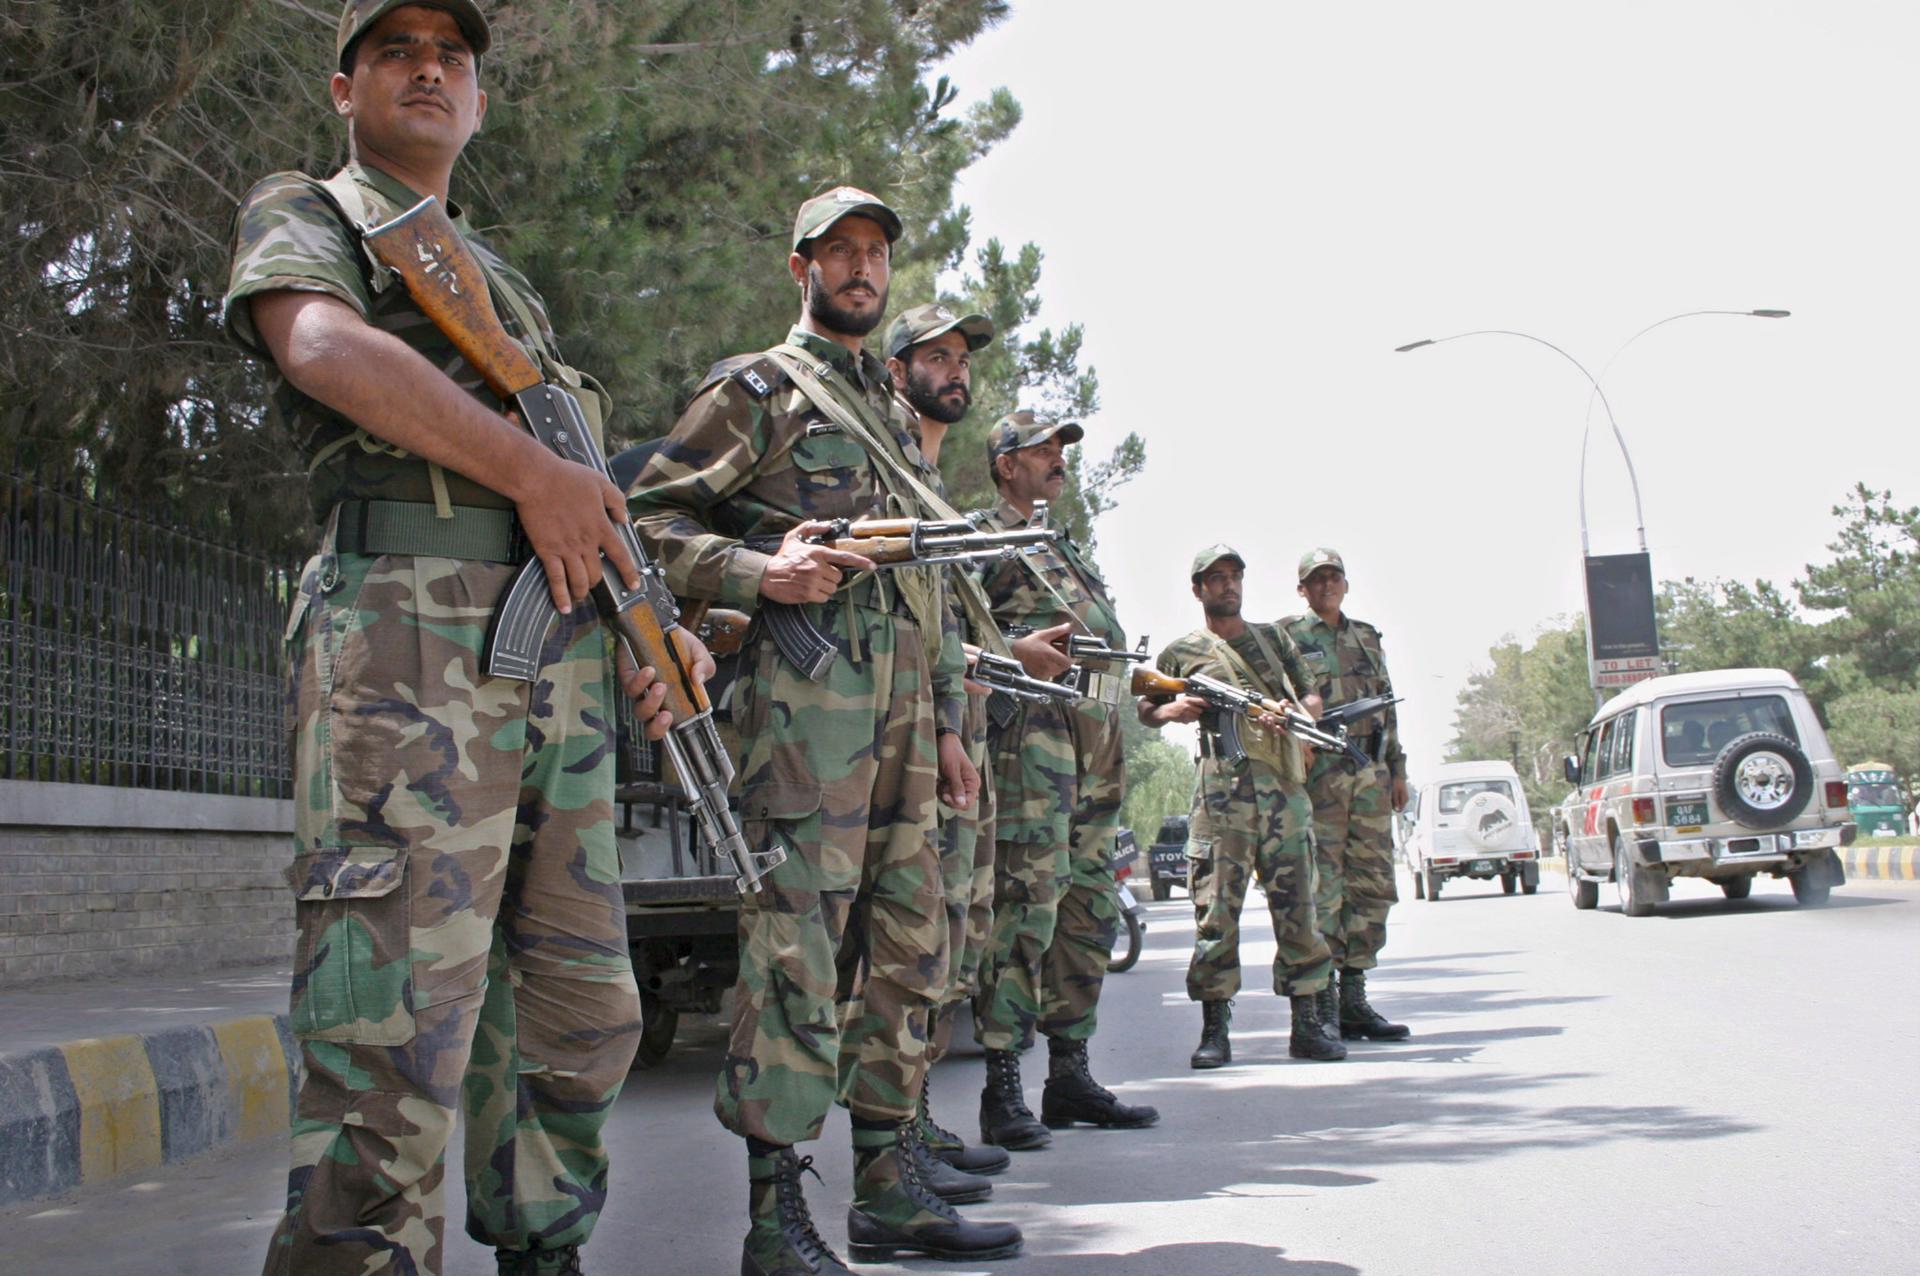 A file photo shows Pakistani paramilitary soldiers standing guard at a checkpoint in Quetta, Balochistan. EFE/F. Ahmed